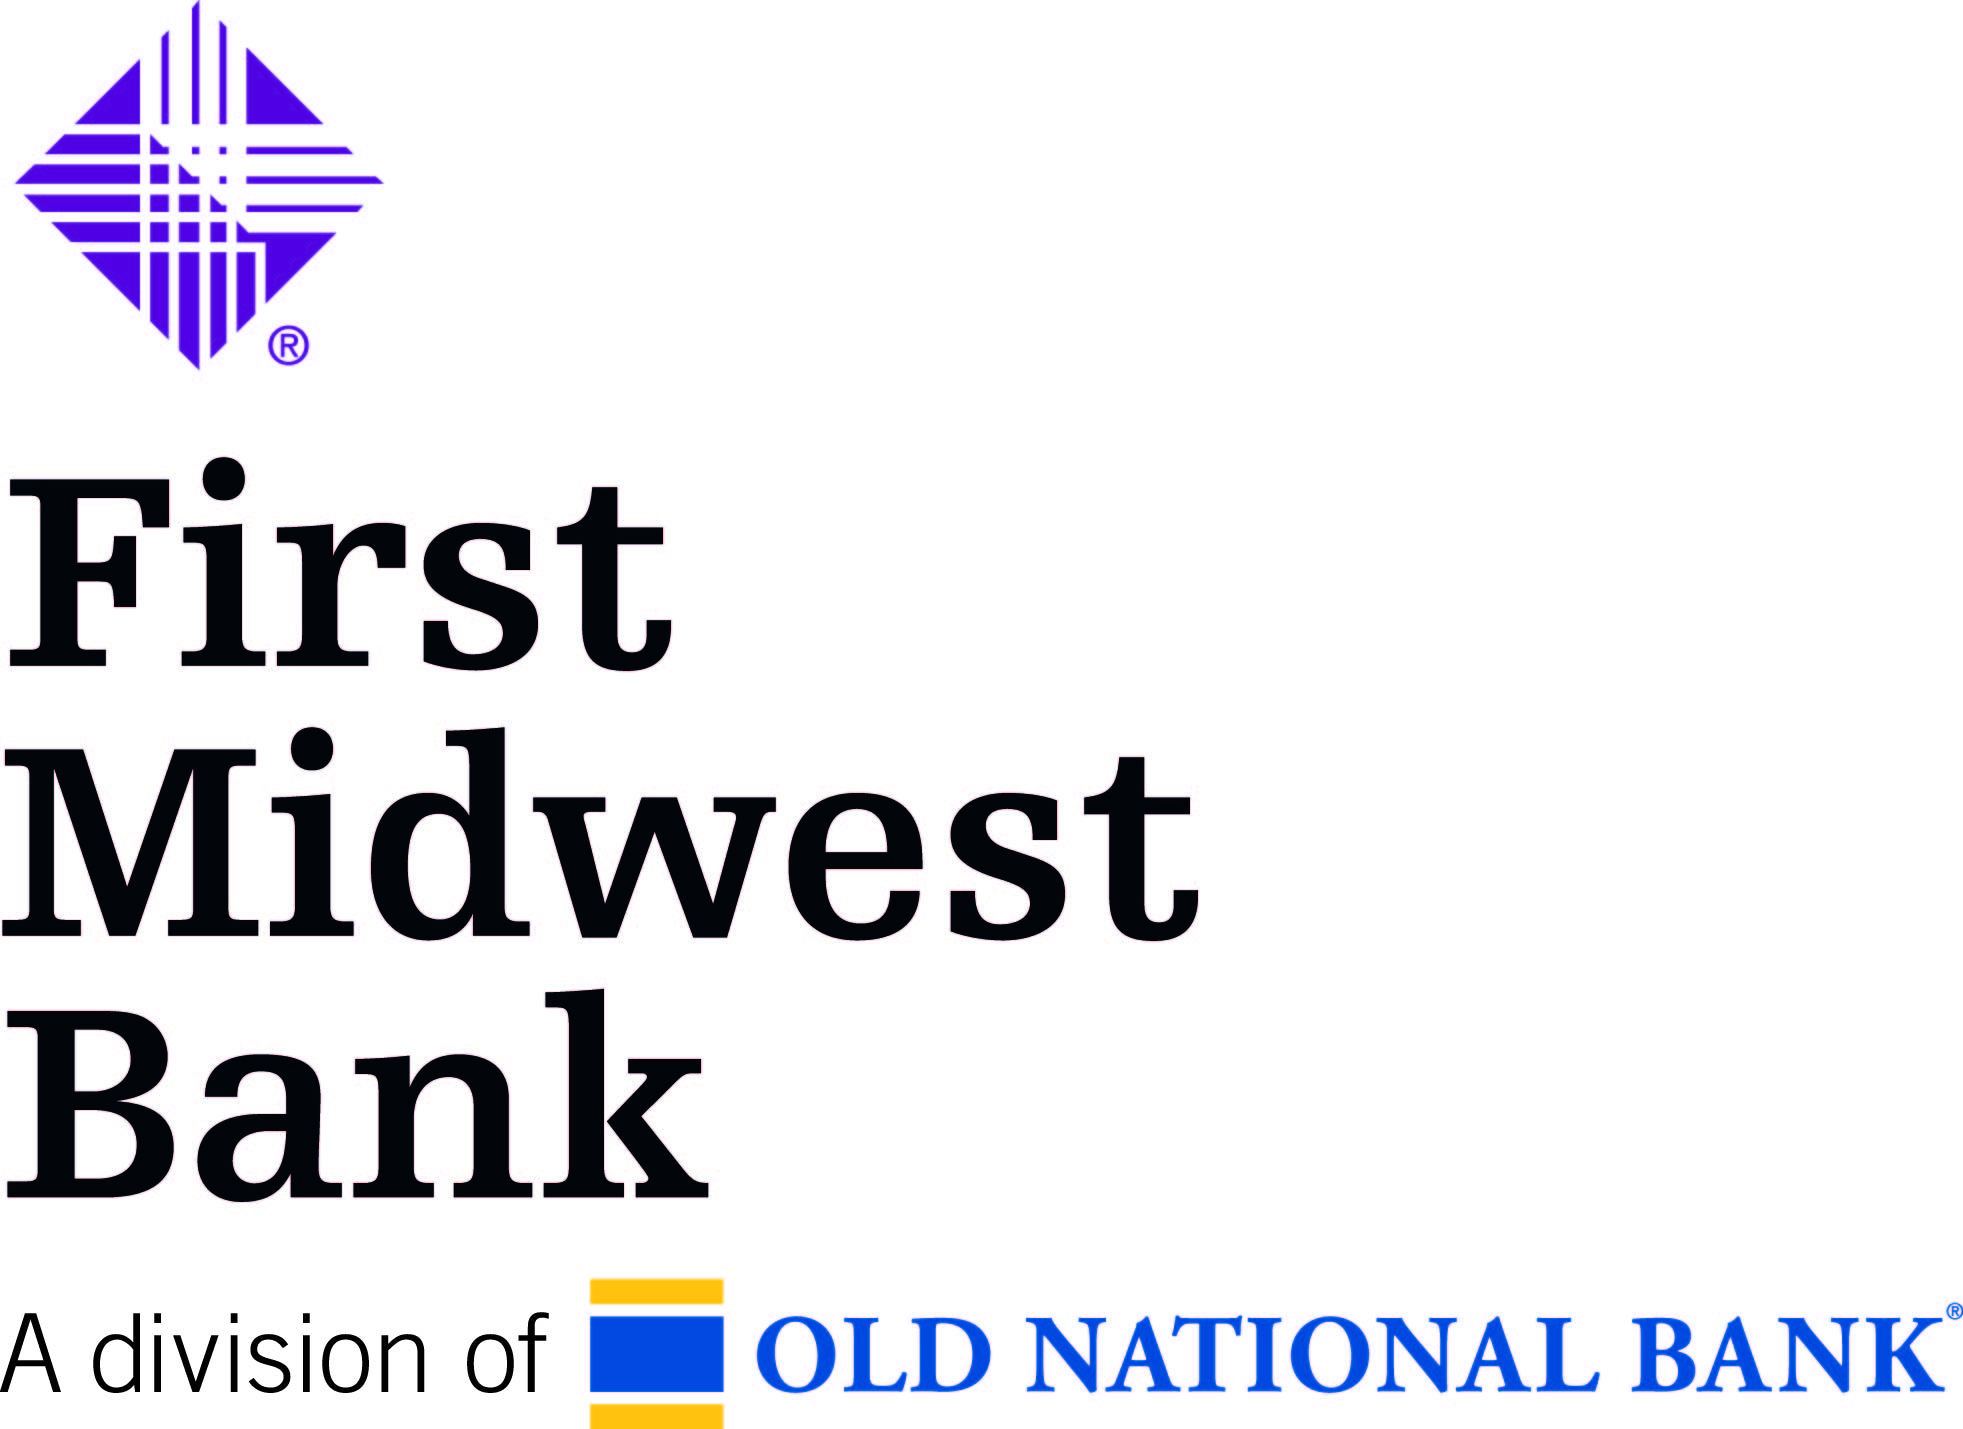 First Midwest Bank, Old National Bank logo